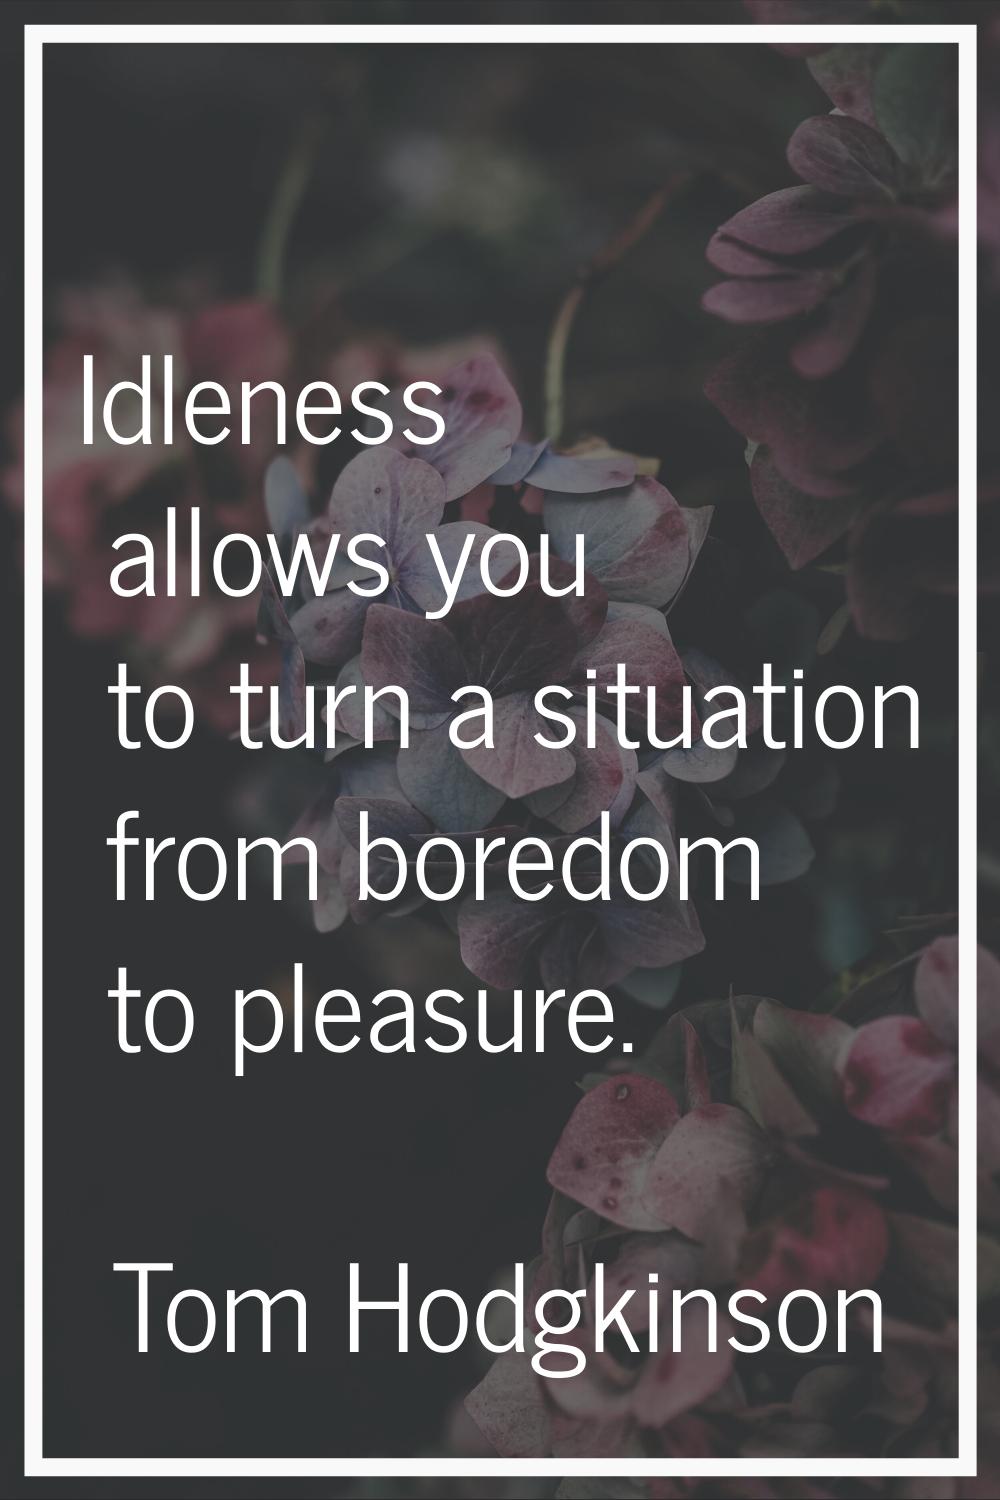 Idleness allows you to turn a situation from boredom to pleasure.